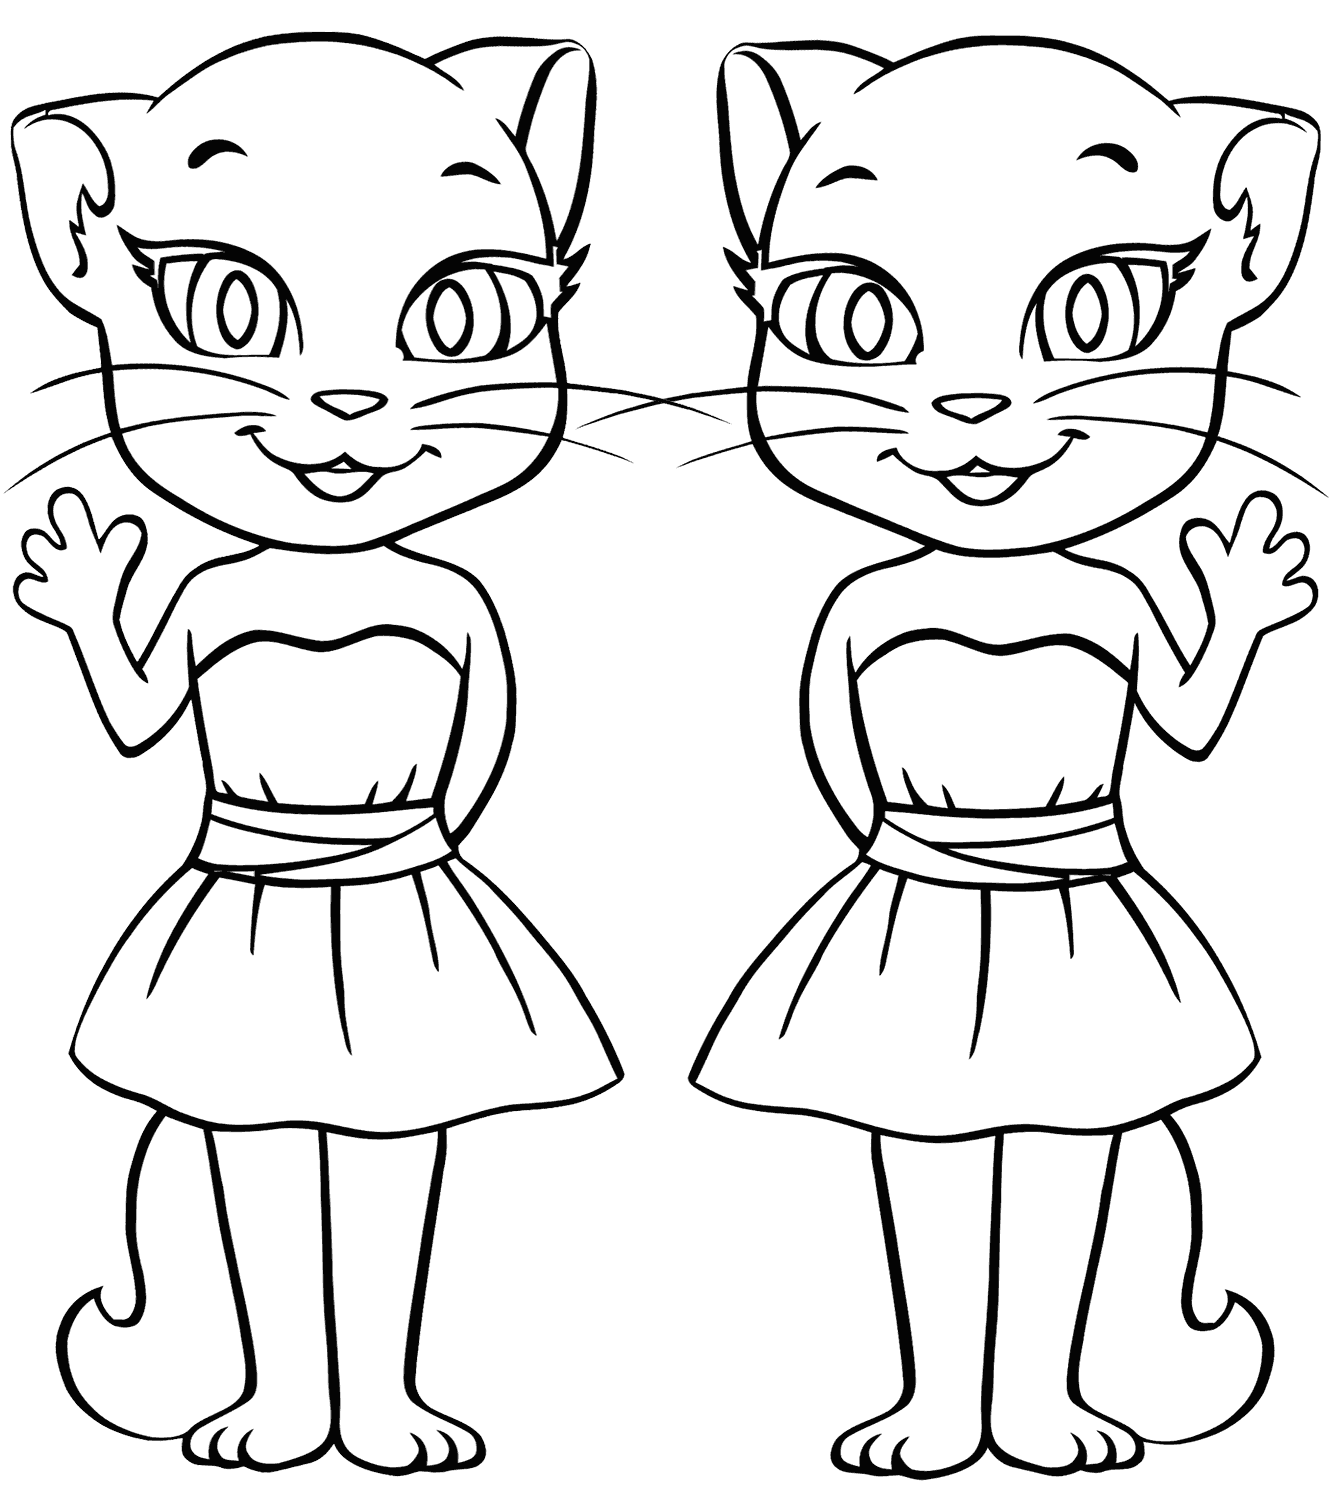 Angela Coloring Pages.